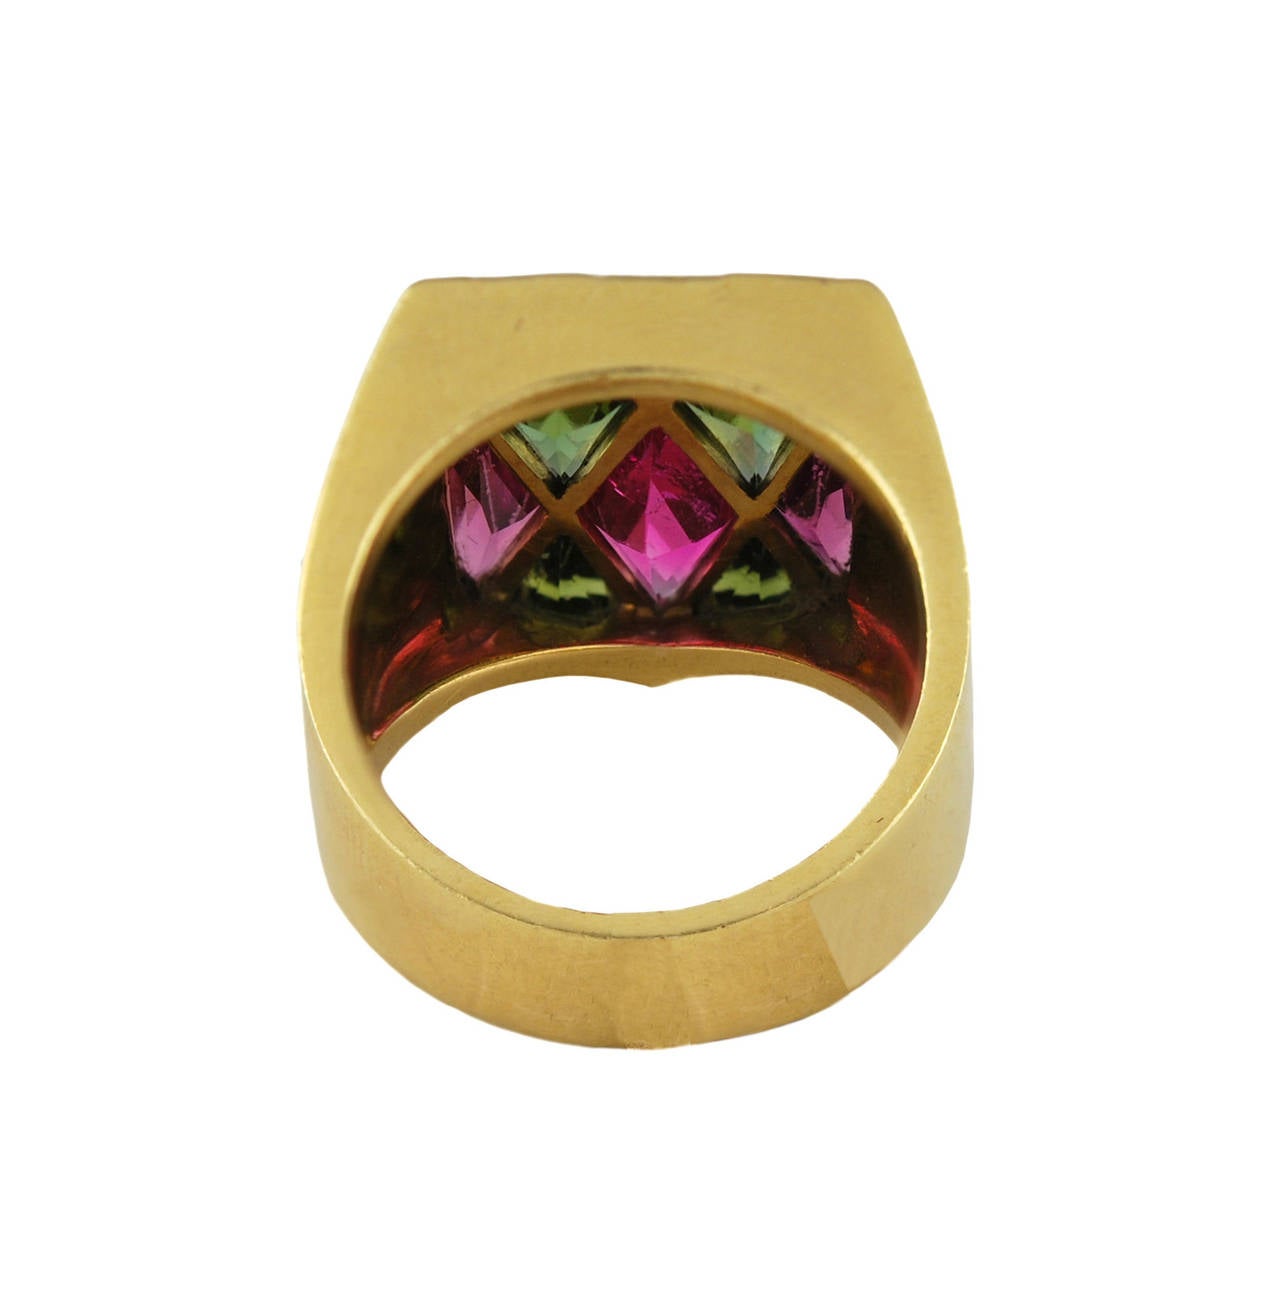 The stones mounted in a Harlequin pattern and is, I am told, the heraldic crest of an Italian Count and was made in the 1950's.
The unmarked Gold tests for 18k and the pink and green combination is most attractive. Some of the stones are lightly